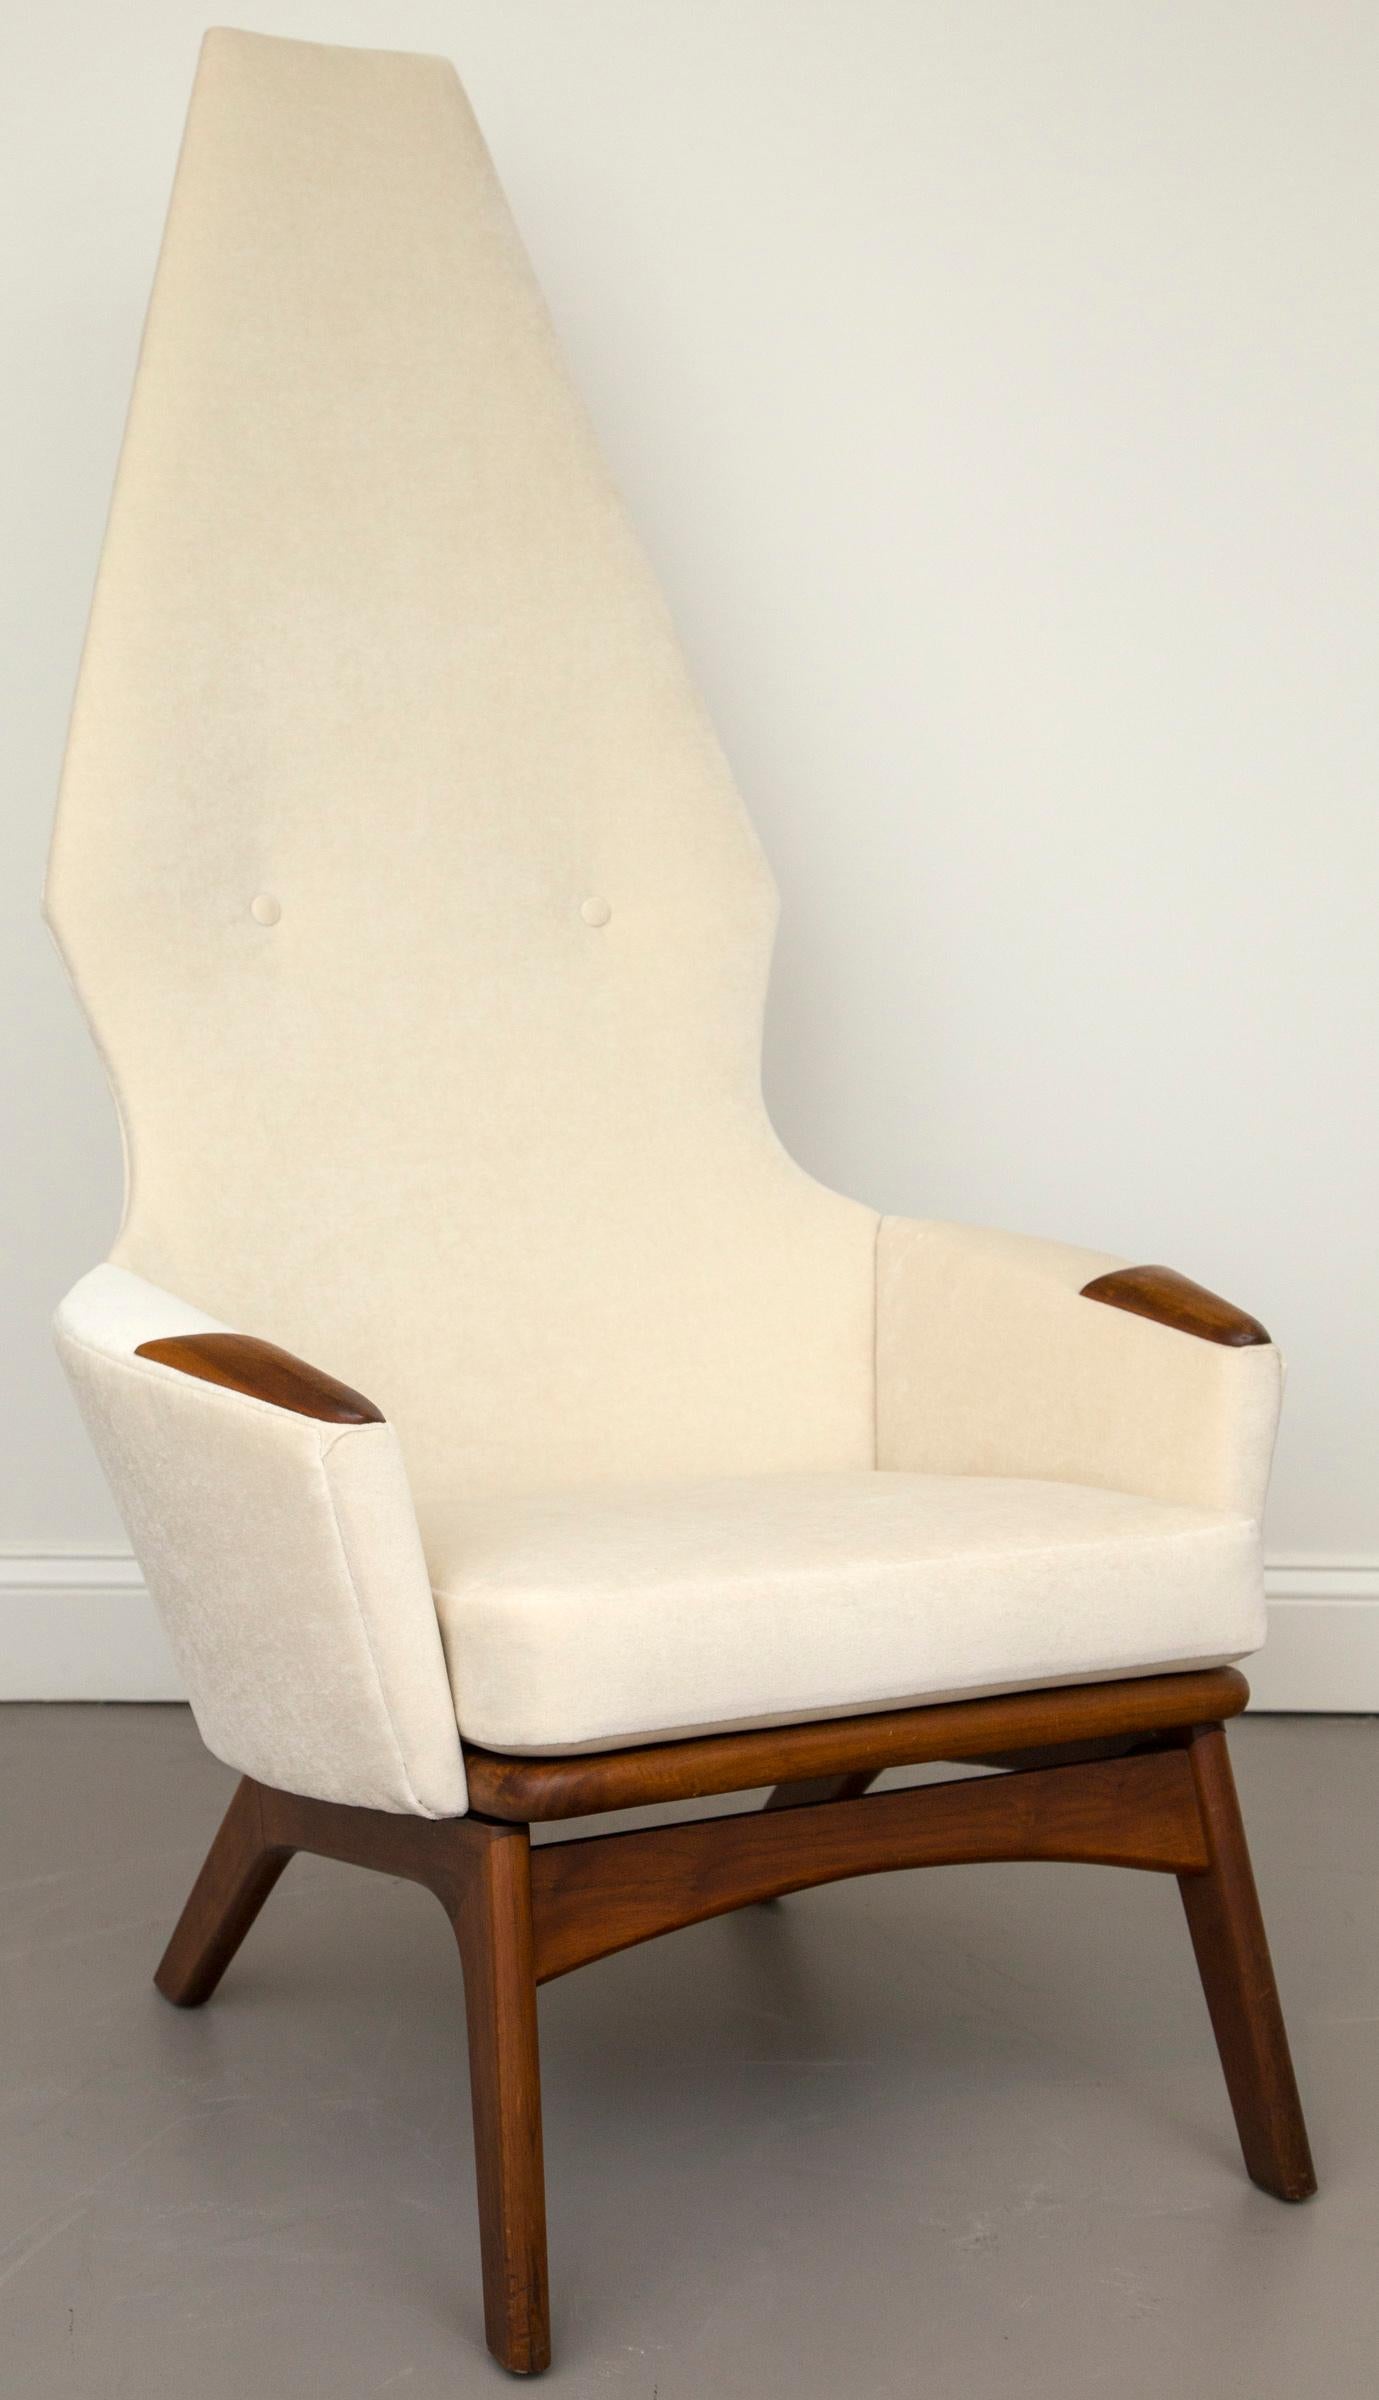 Pair of two, newly upholstered Adrian Pearsall chairs in luxe cream color velvet fabric.

Adrian Pearsall is regarded as an iconic Mid-Century Modern American designer. Pearsall founded Craft Associates in 1952 after studying architecture in order